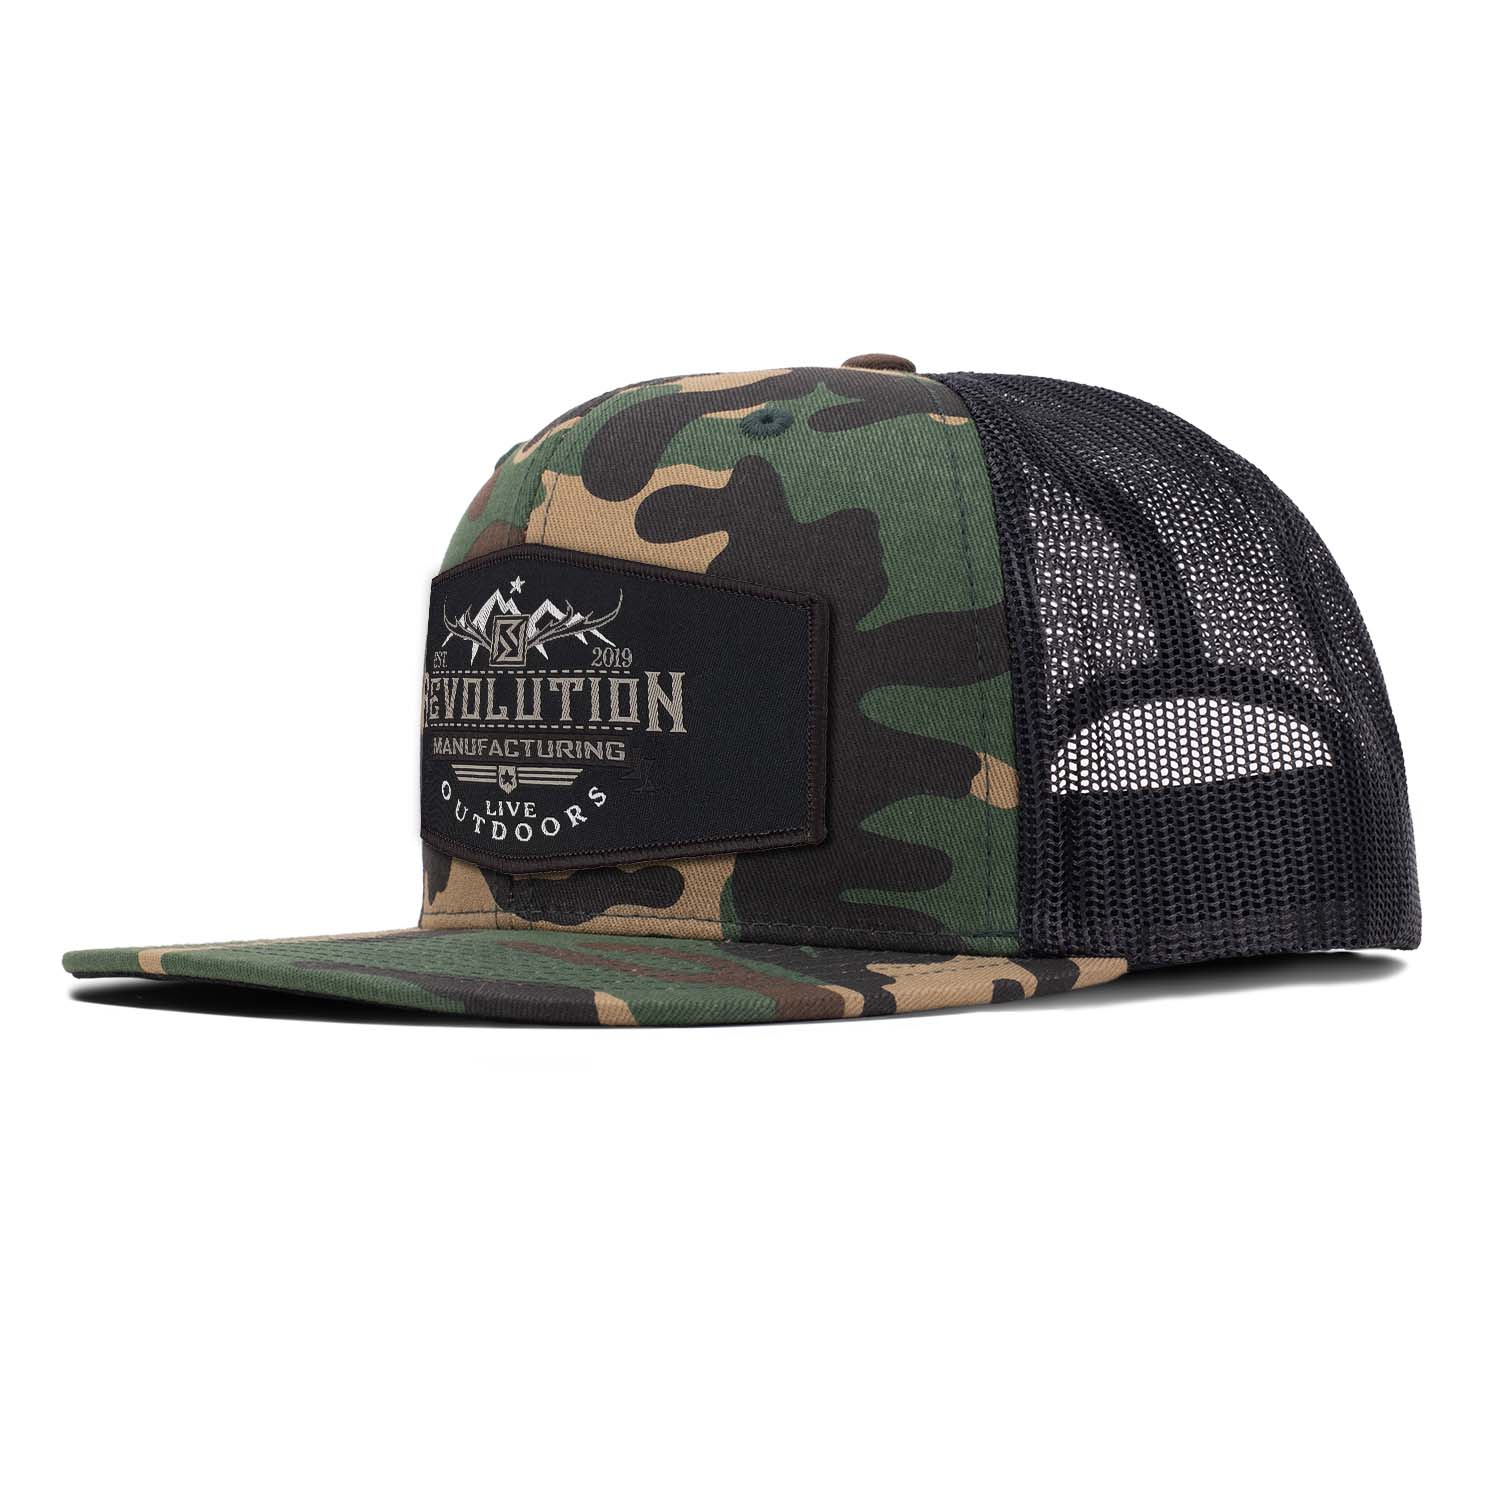 Classic flat bill trucker hat in woodland camo with black mesh with a black with brown border Revolution Mfg Live Outdoors woven patch